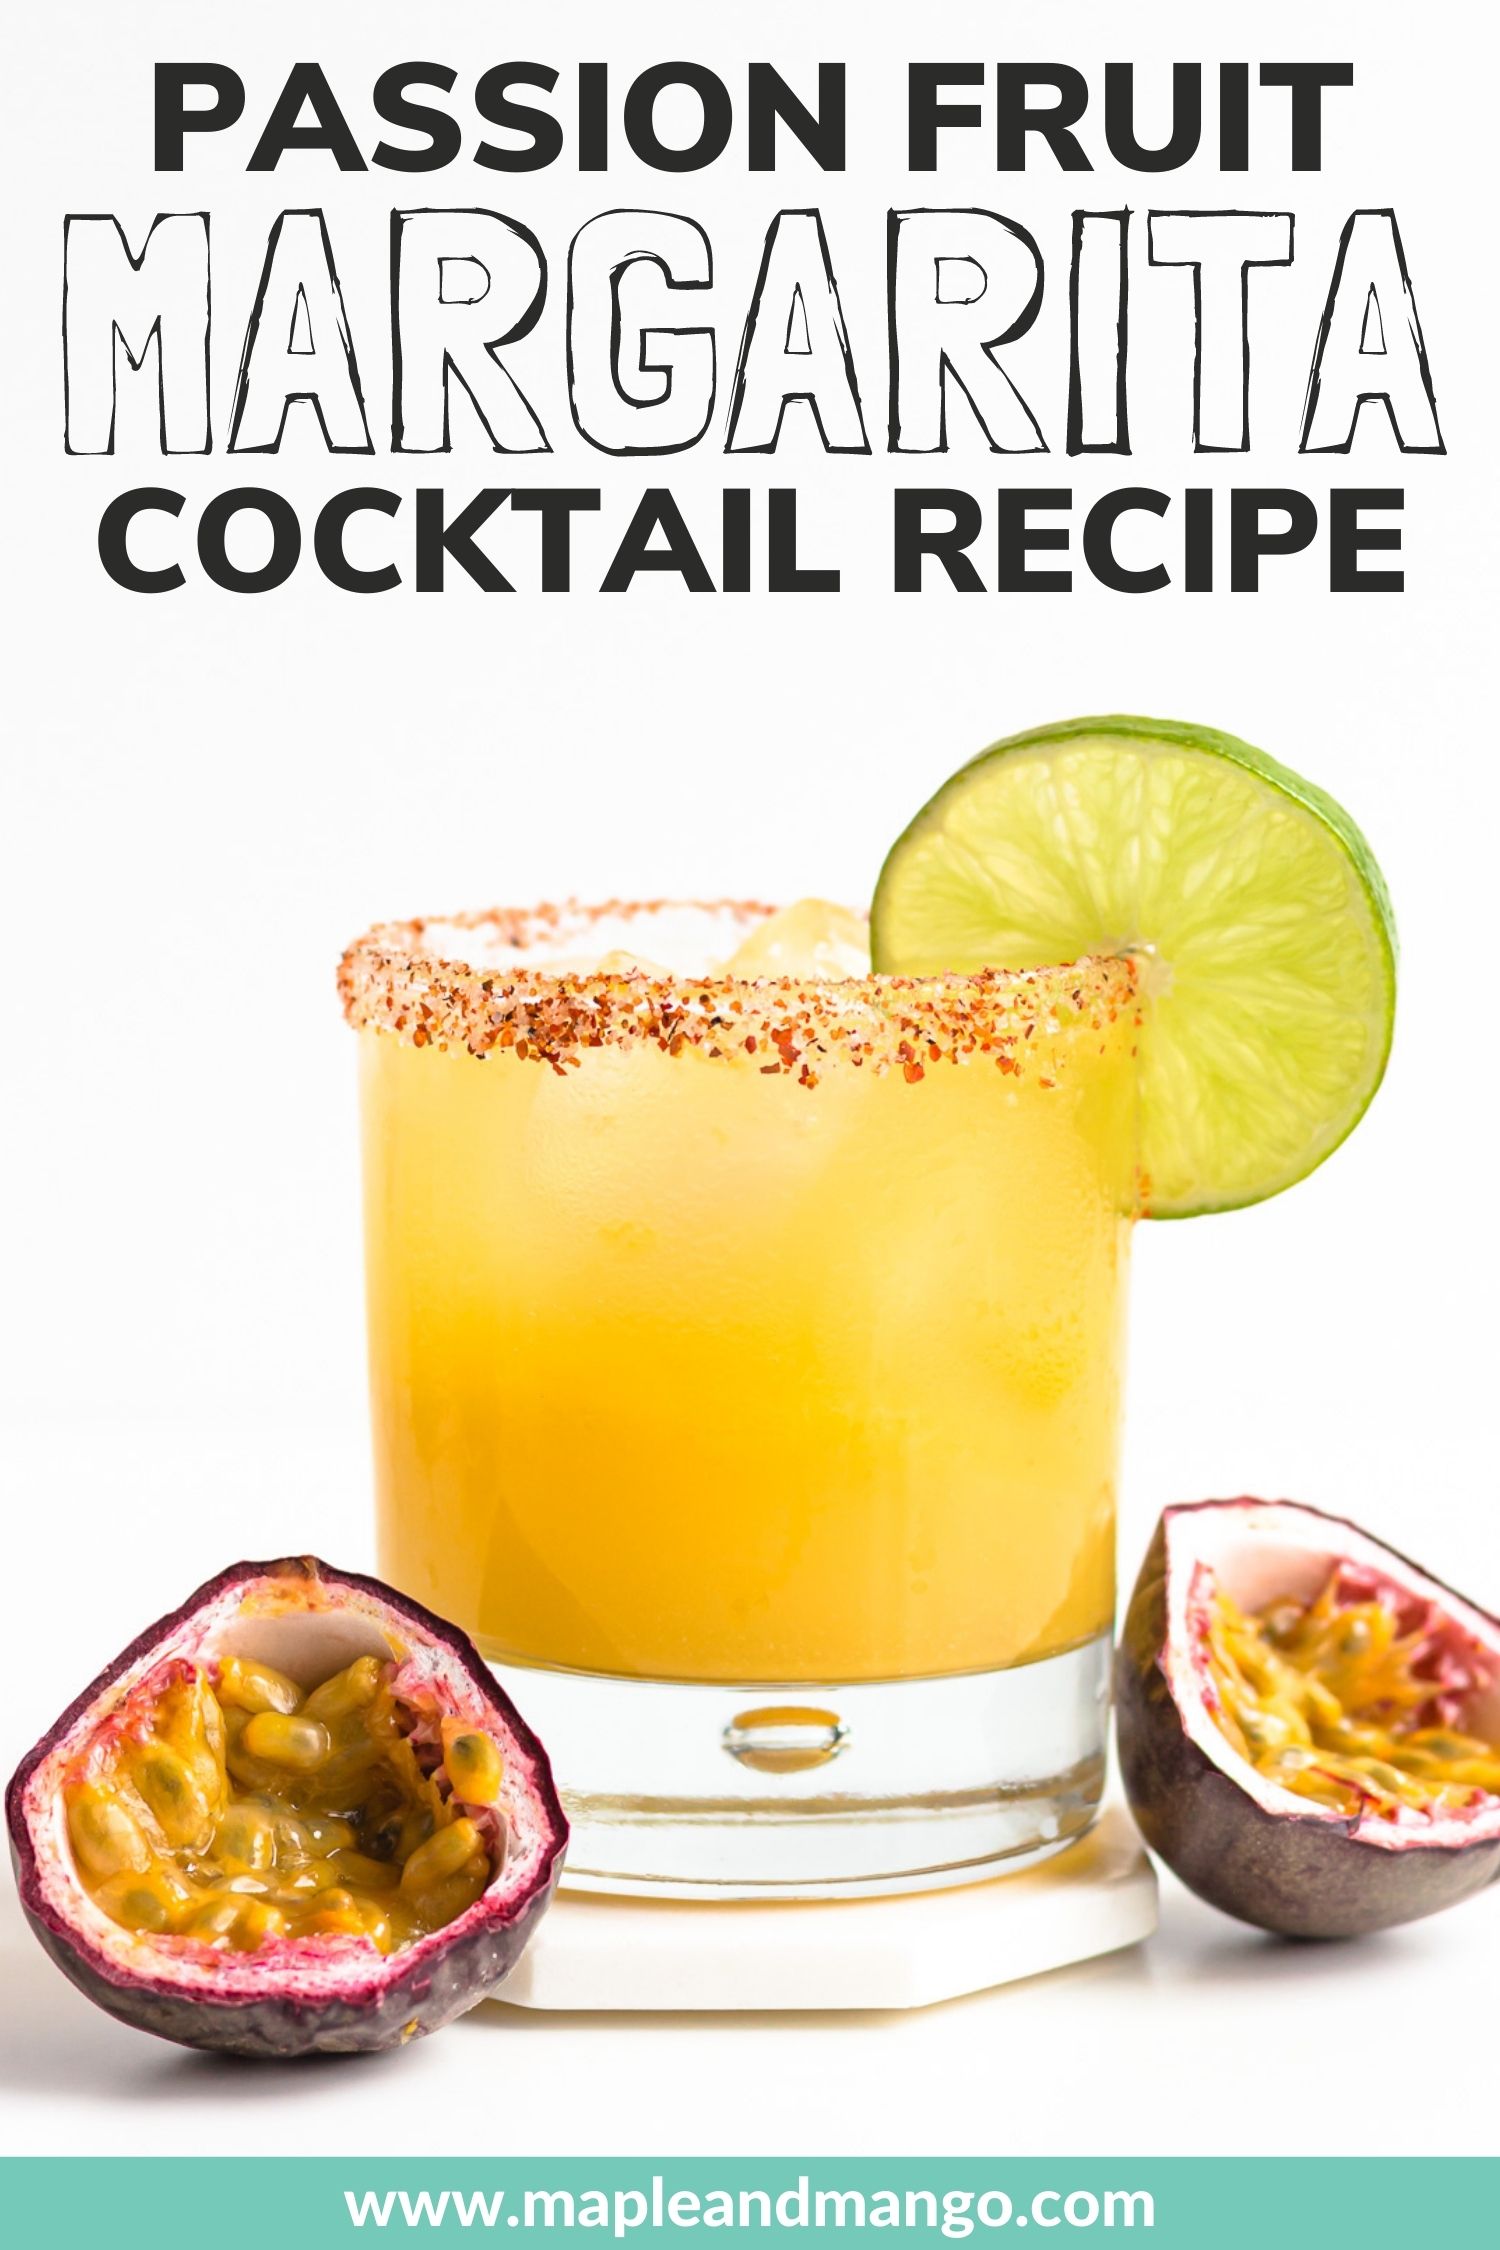 Pinterest graphic for a passion fruit margarita cocktail recipe.